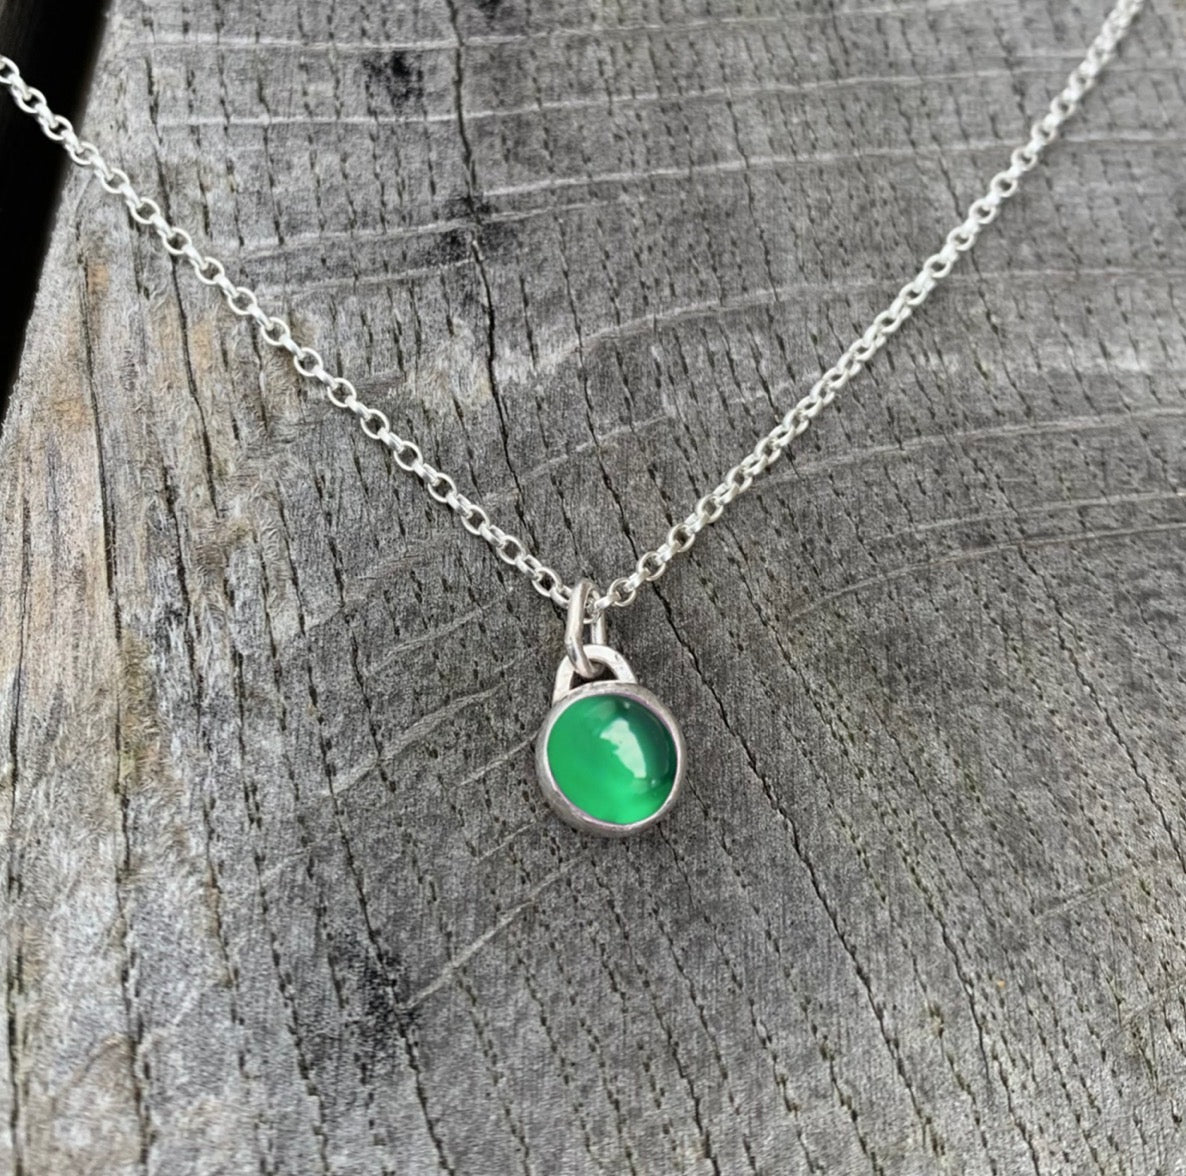 A green onyx stone set in silver on a sterling silver chain.